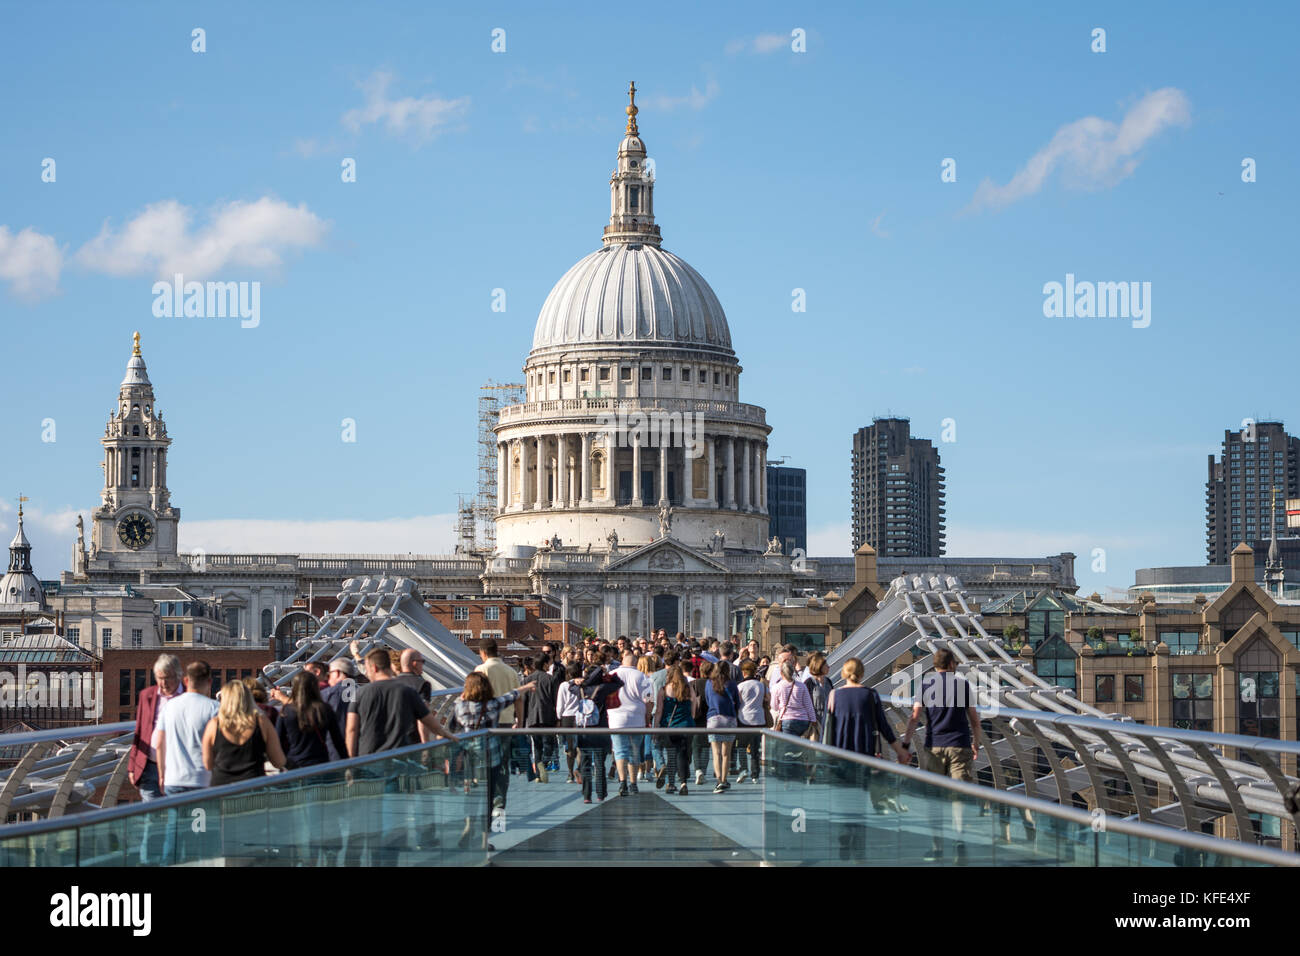 London, UK - August 05, 2017: St Paul's Cathedral with people walking on the Millenium bridge in the foreground Stock Photo